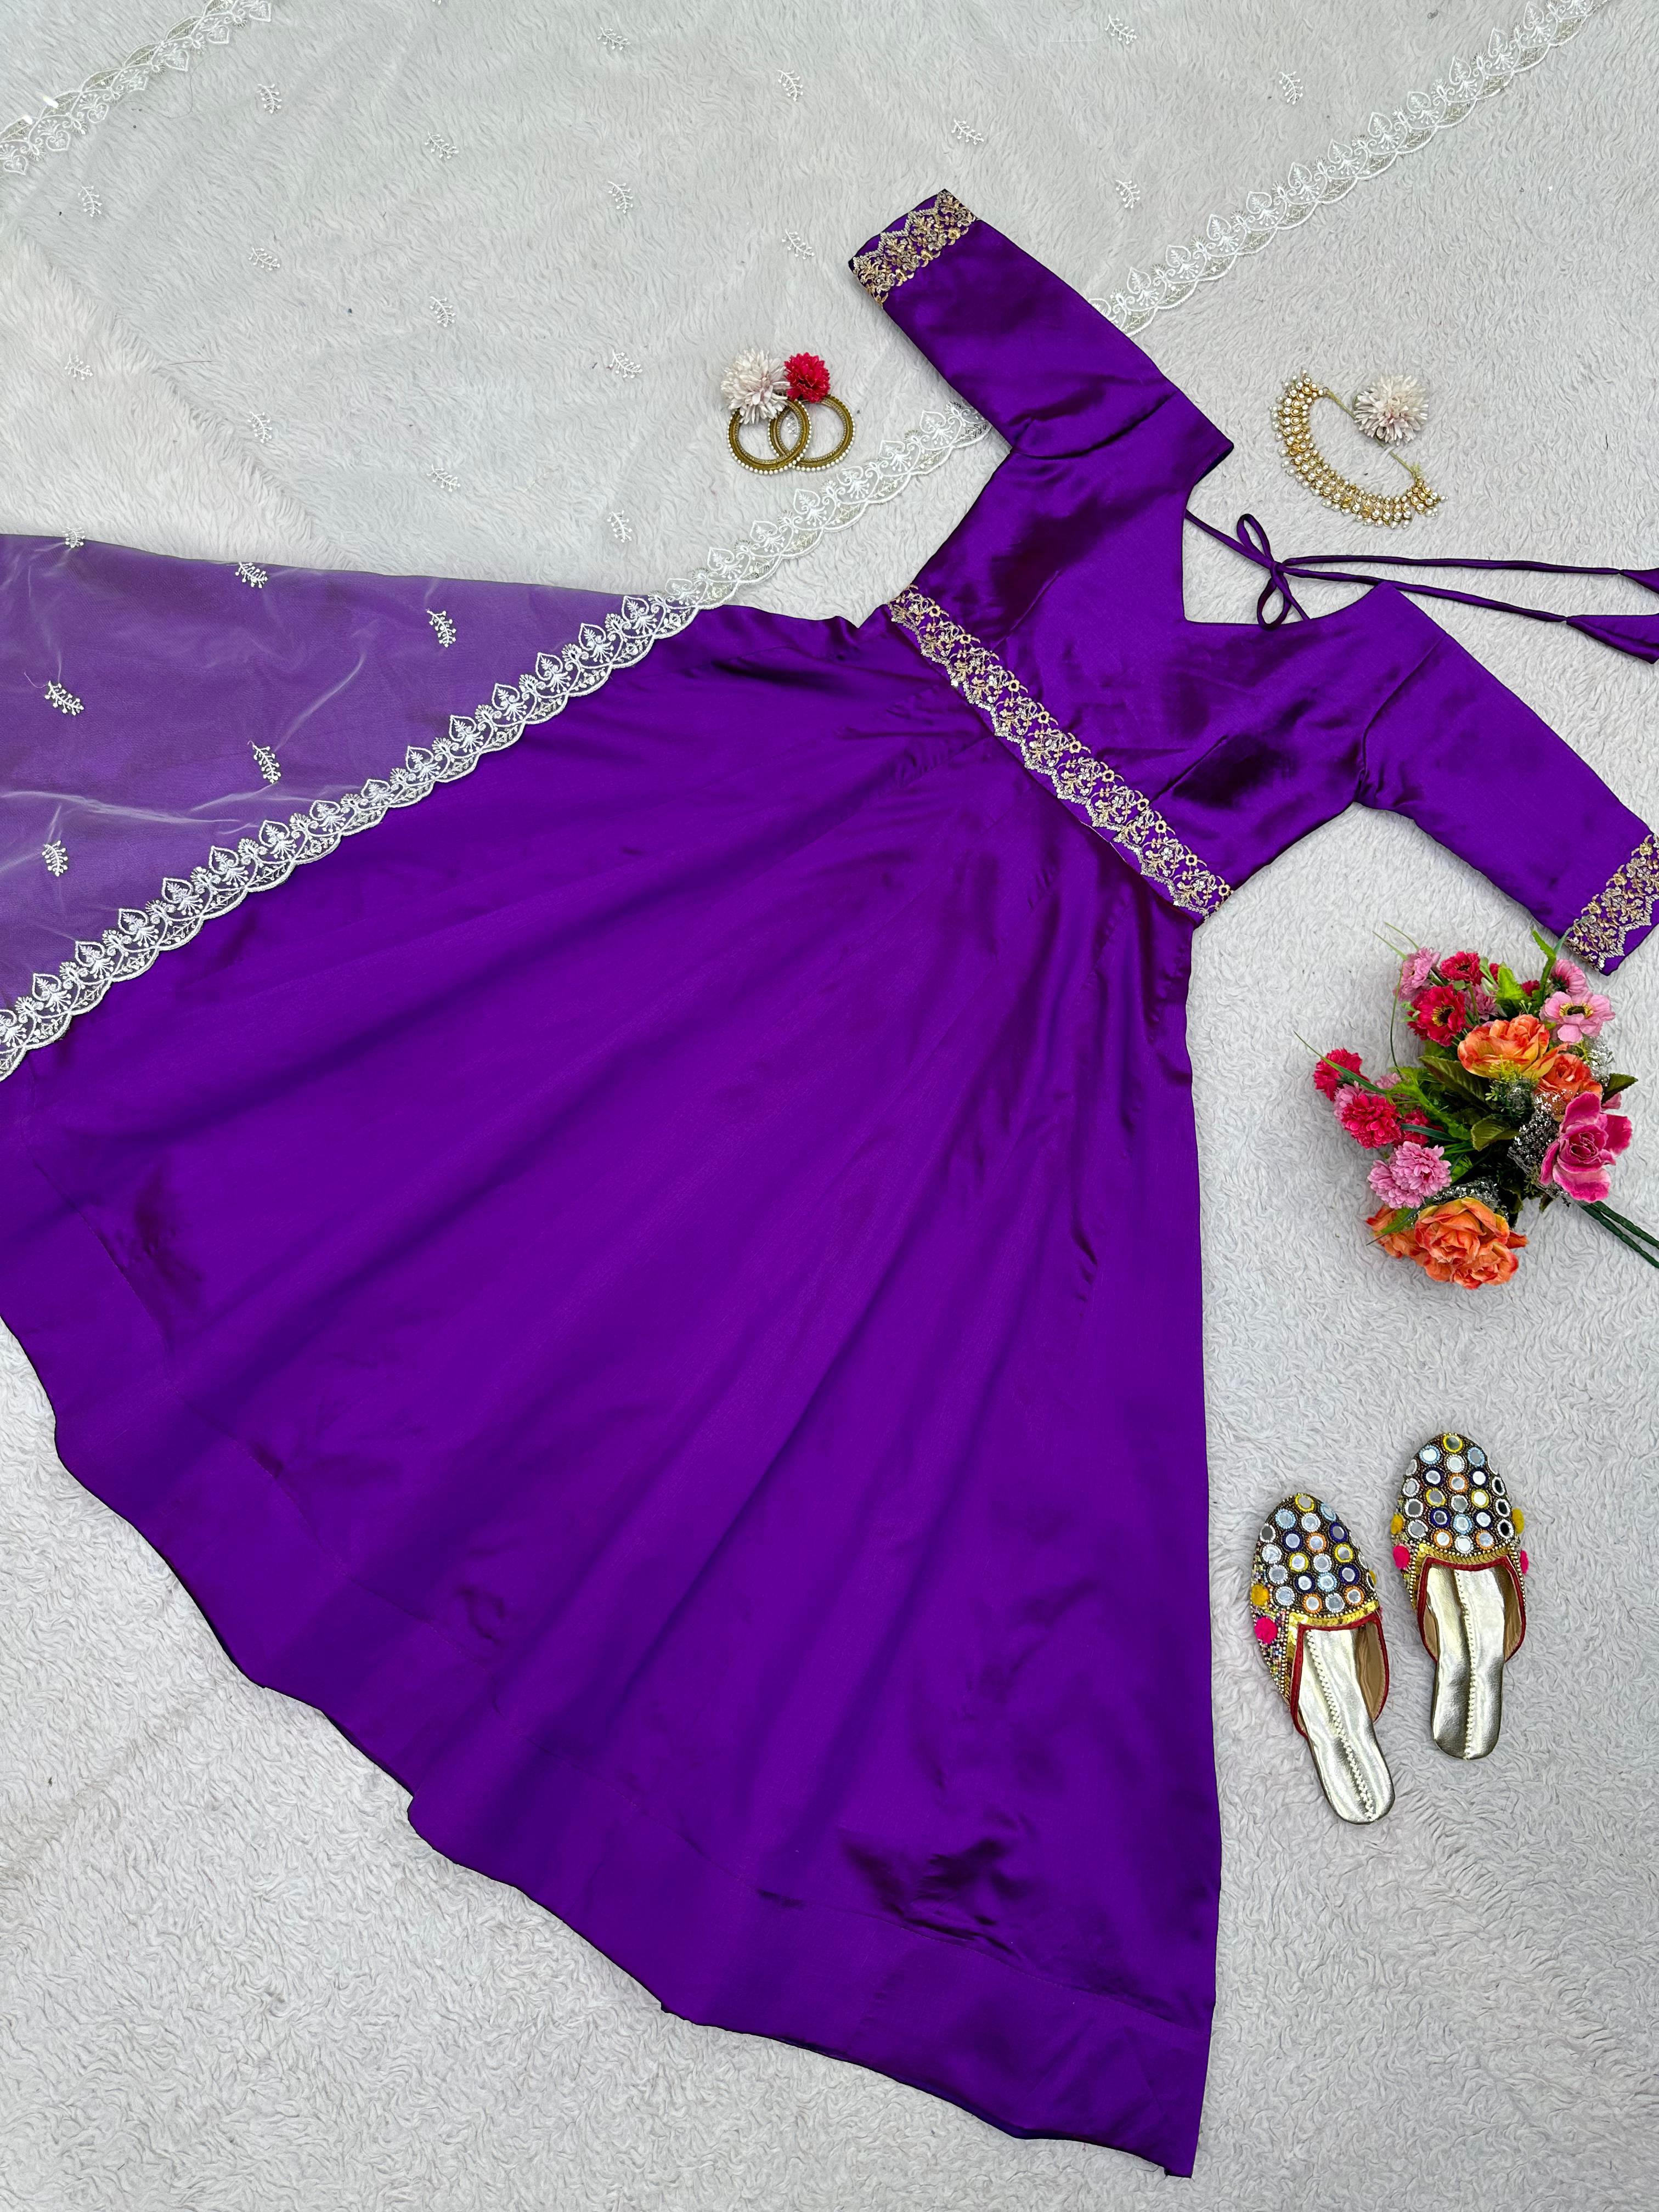 Occasion Wear Purple Color Gown With White Dupatta